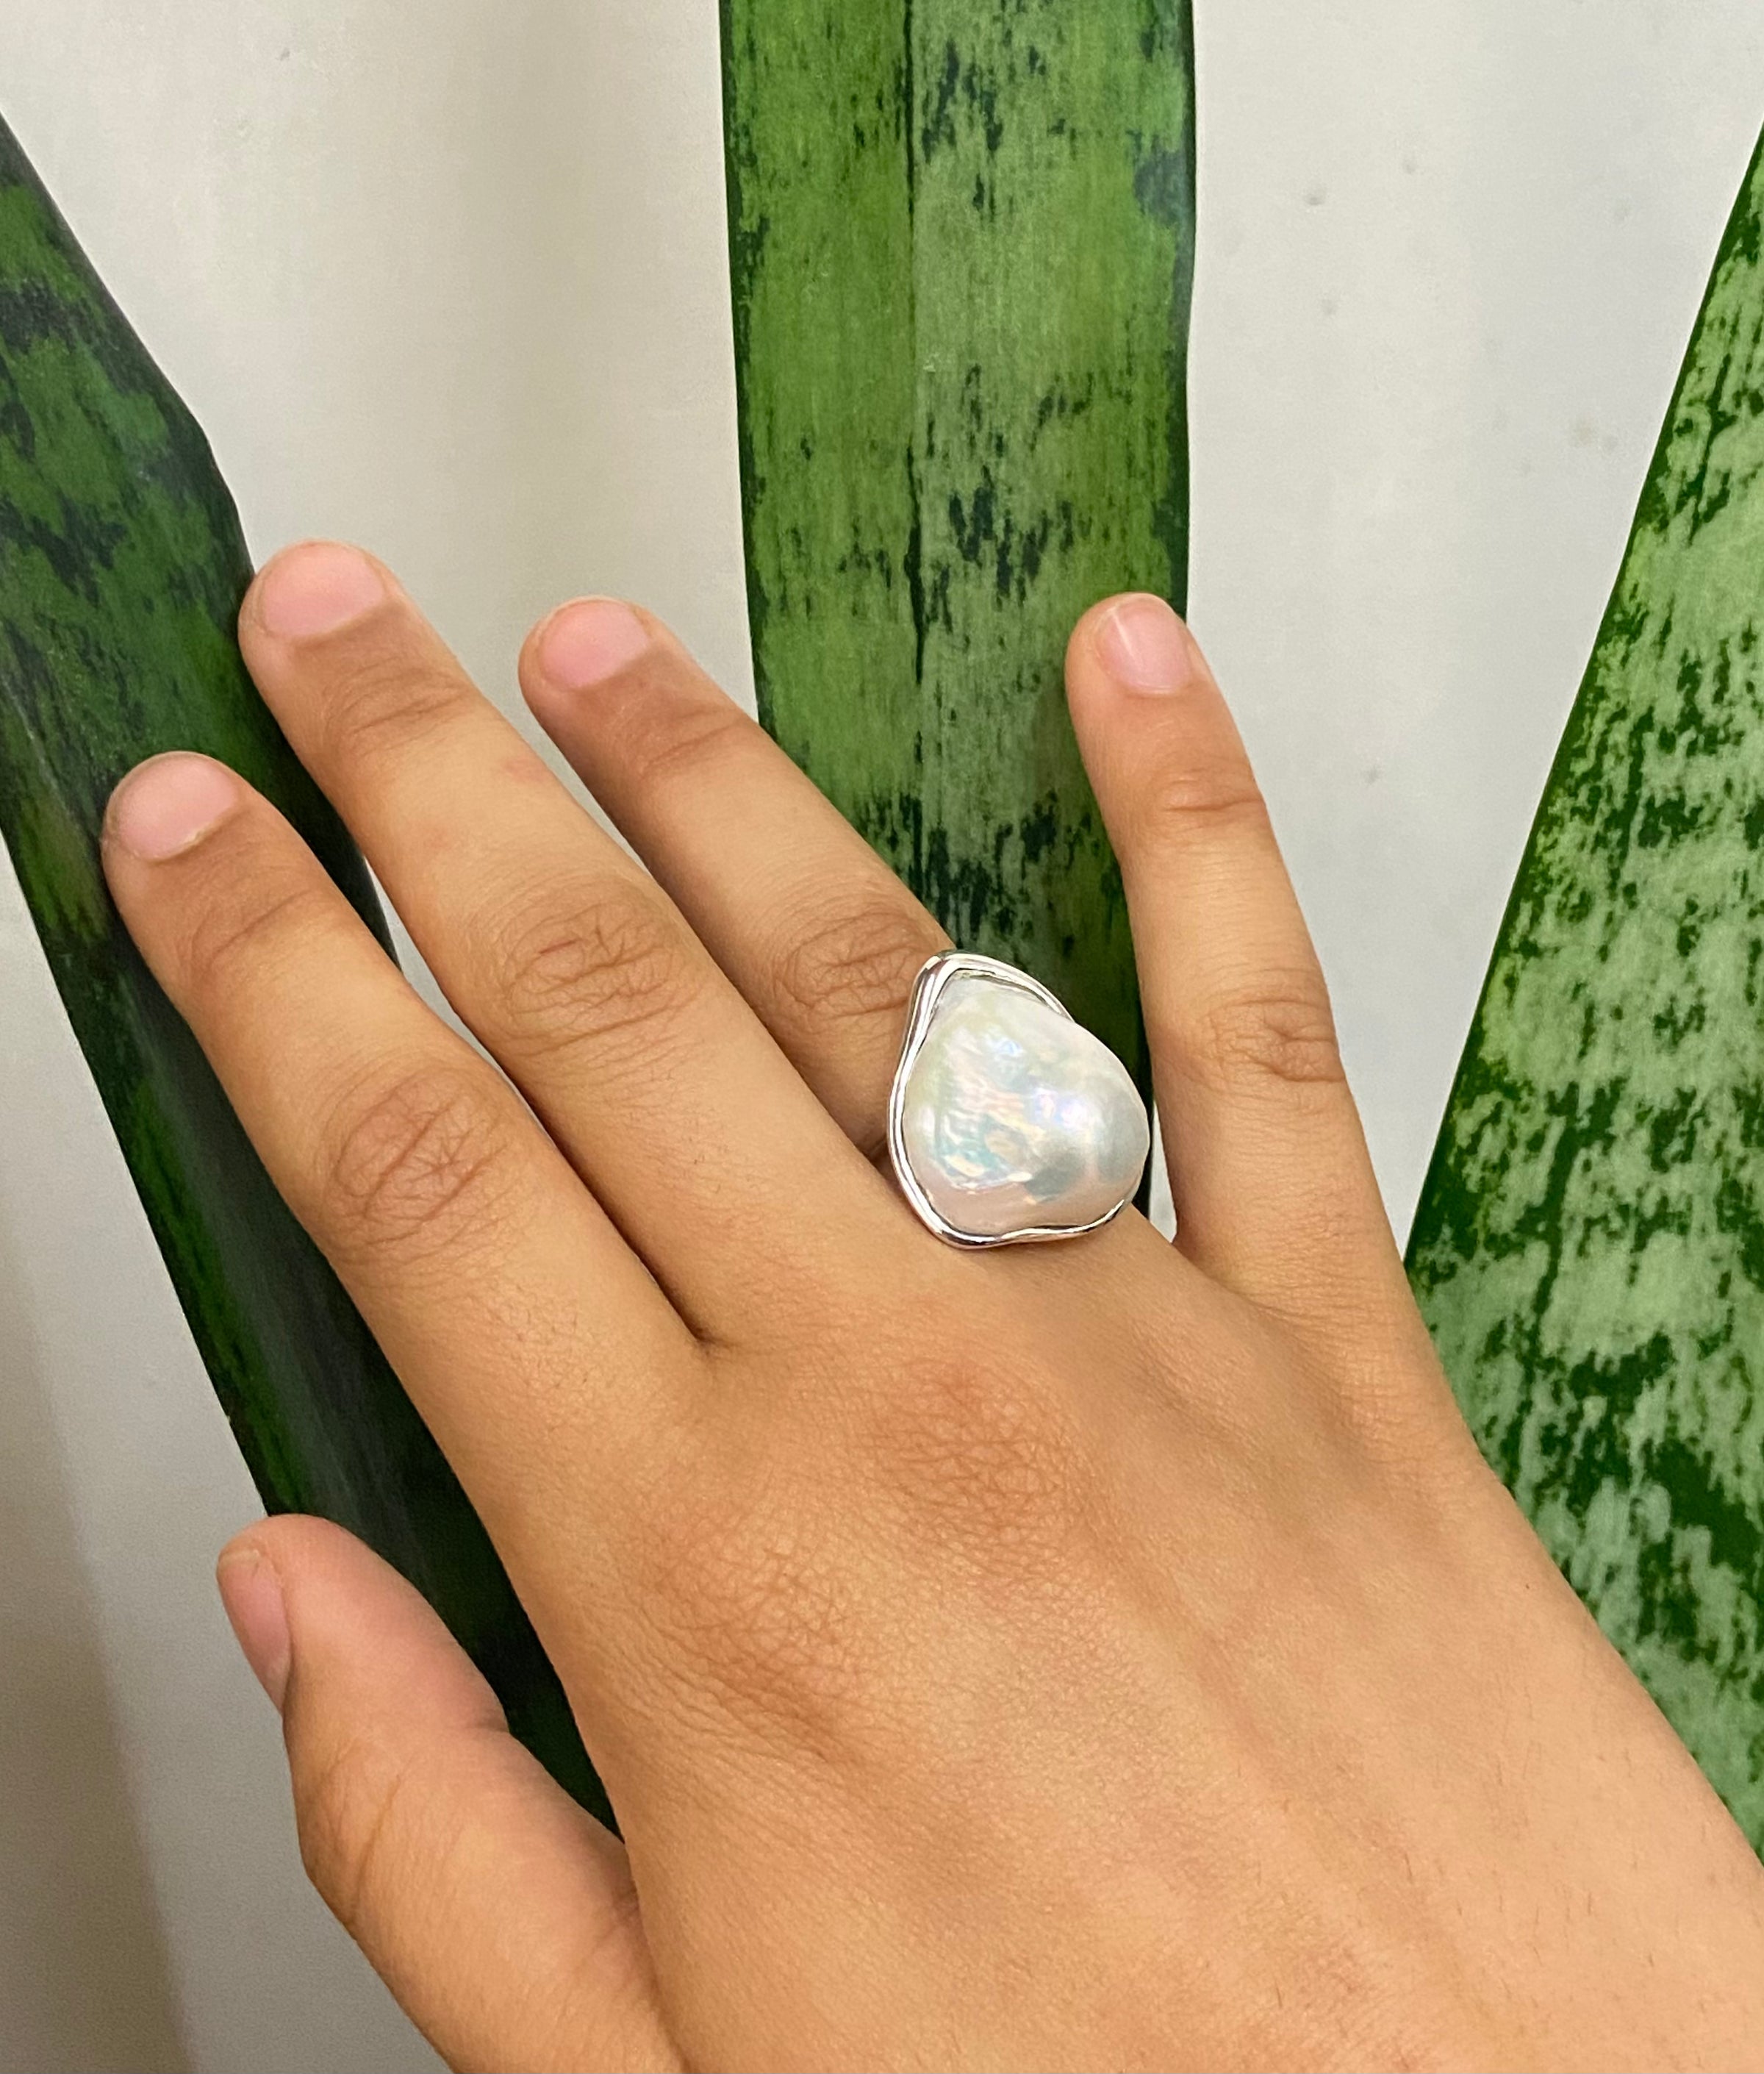 Baroque Pearl Ring